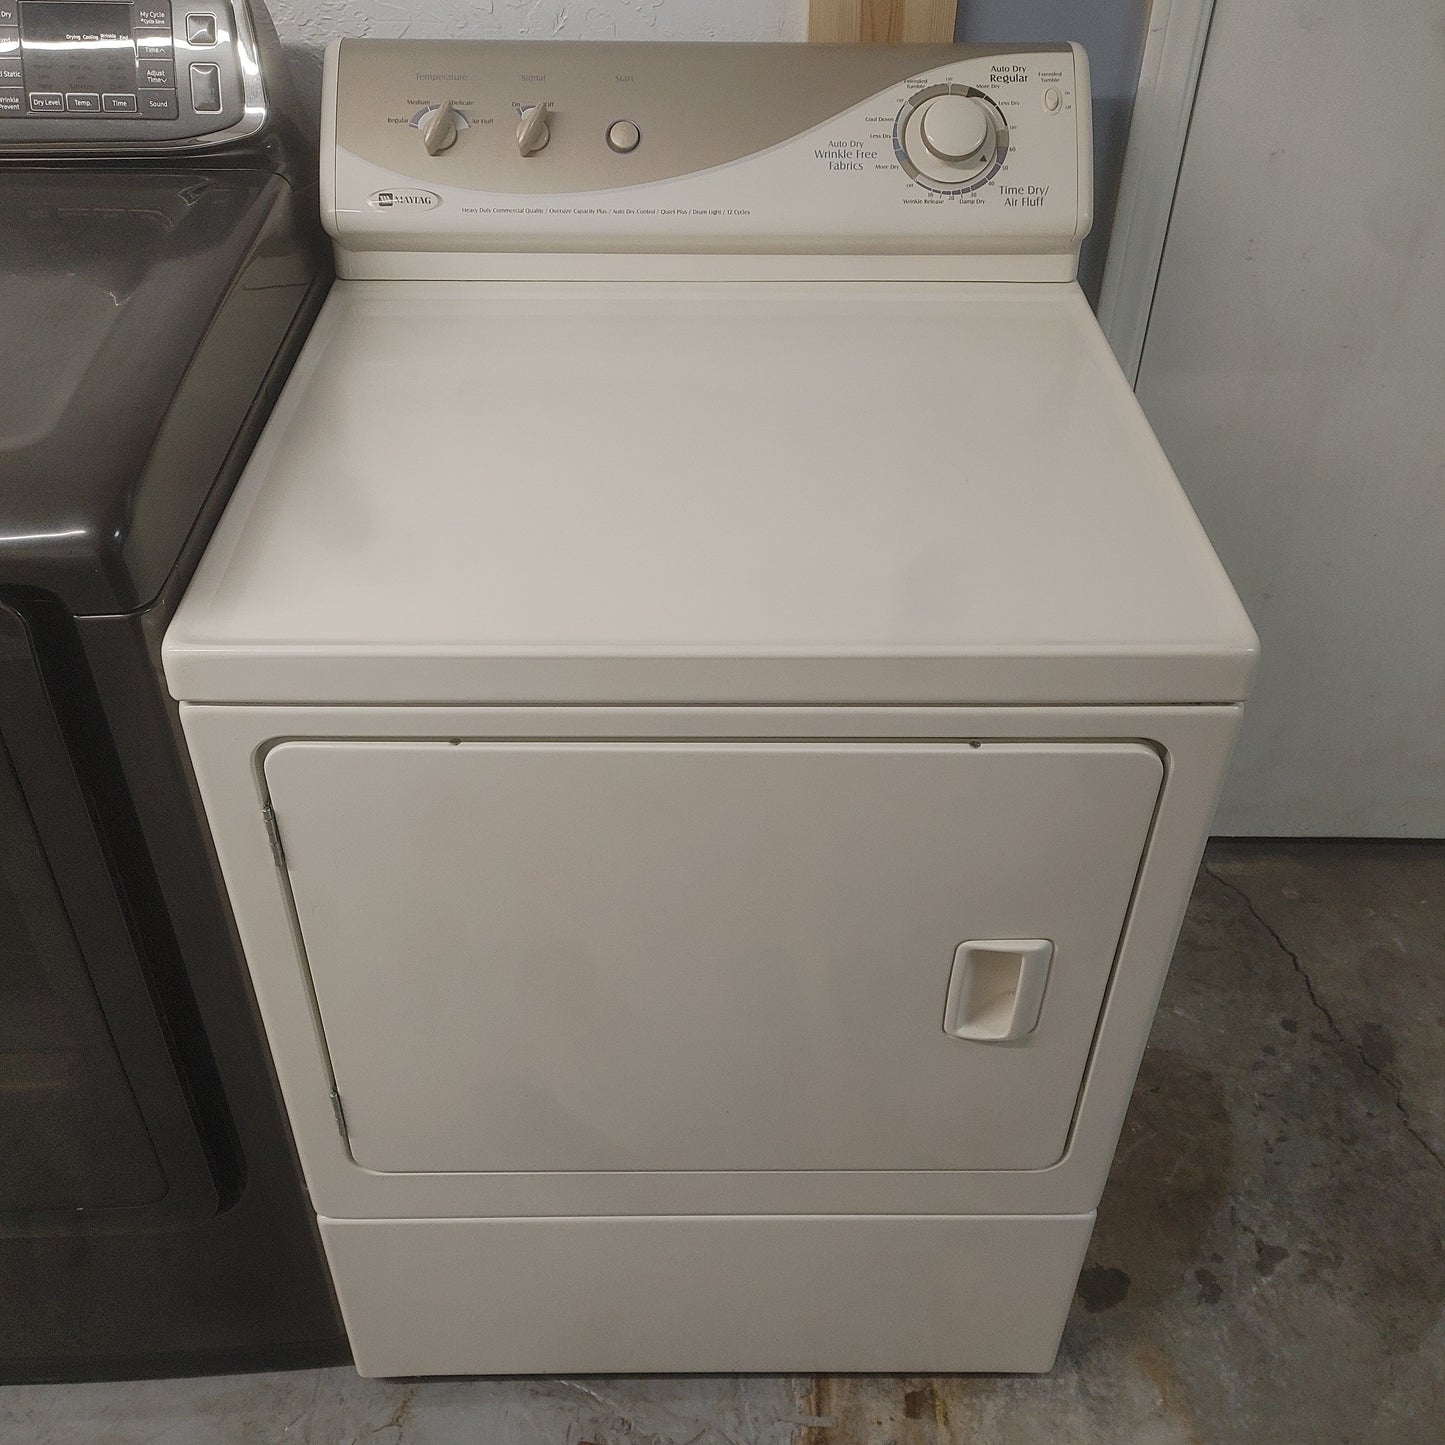 Used Maytag 7 cubic ft Electric Dryer.